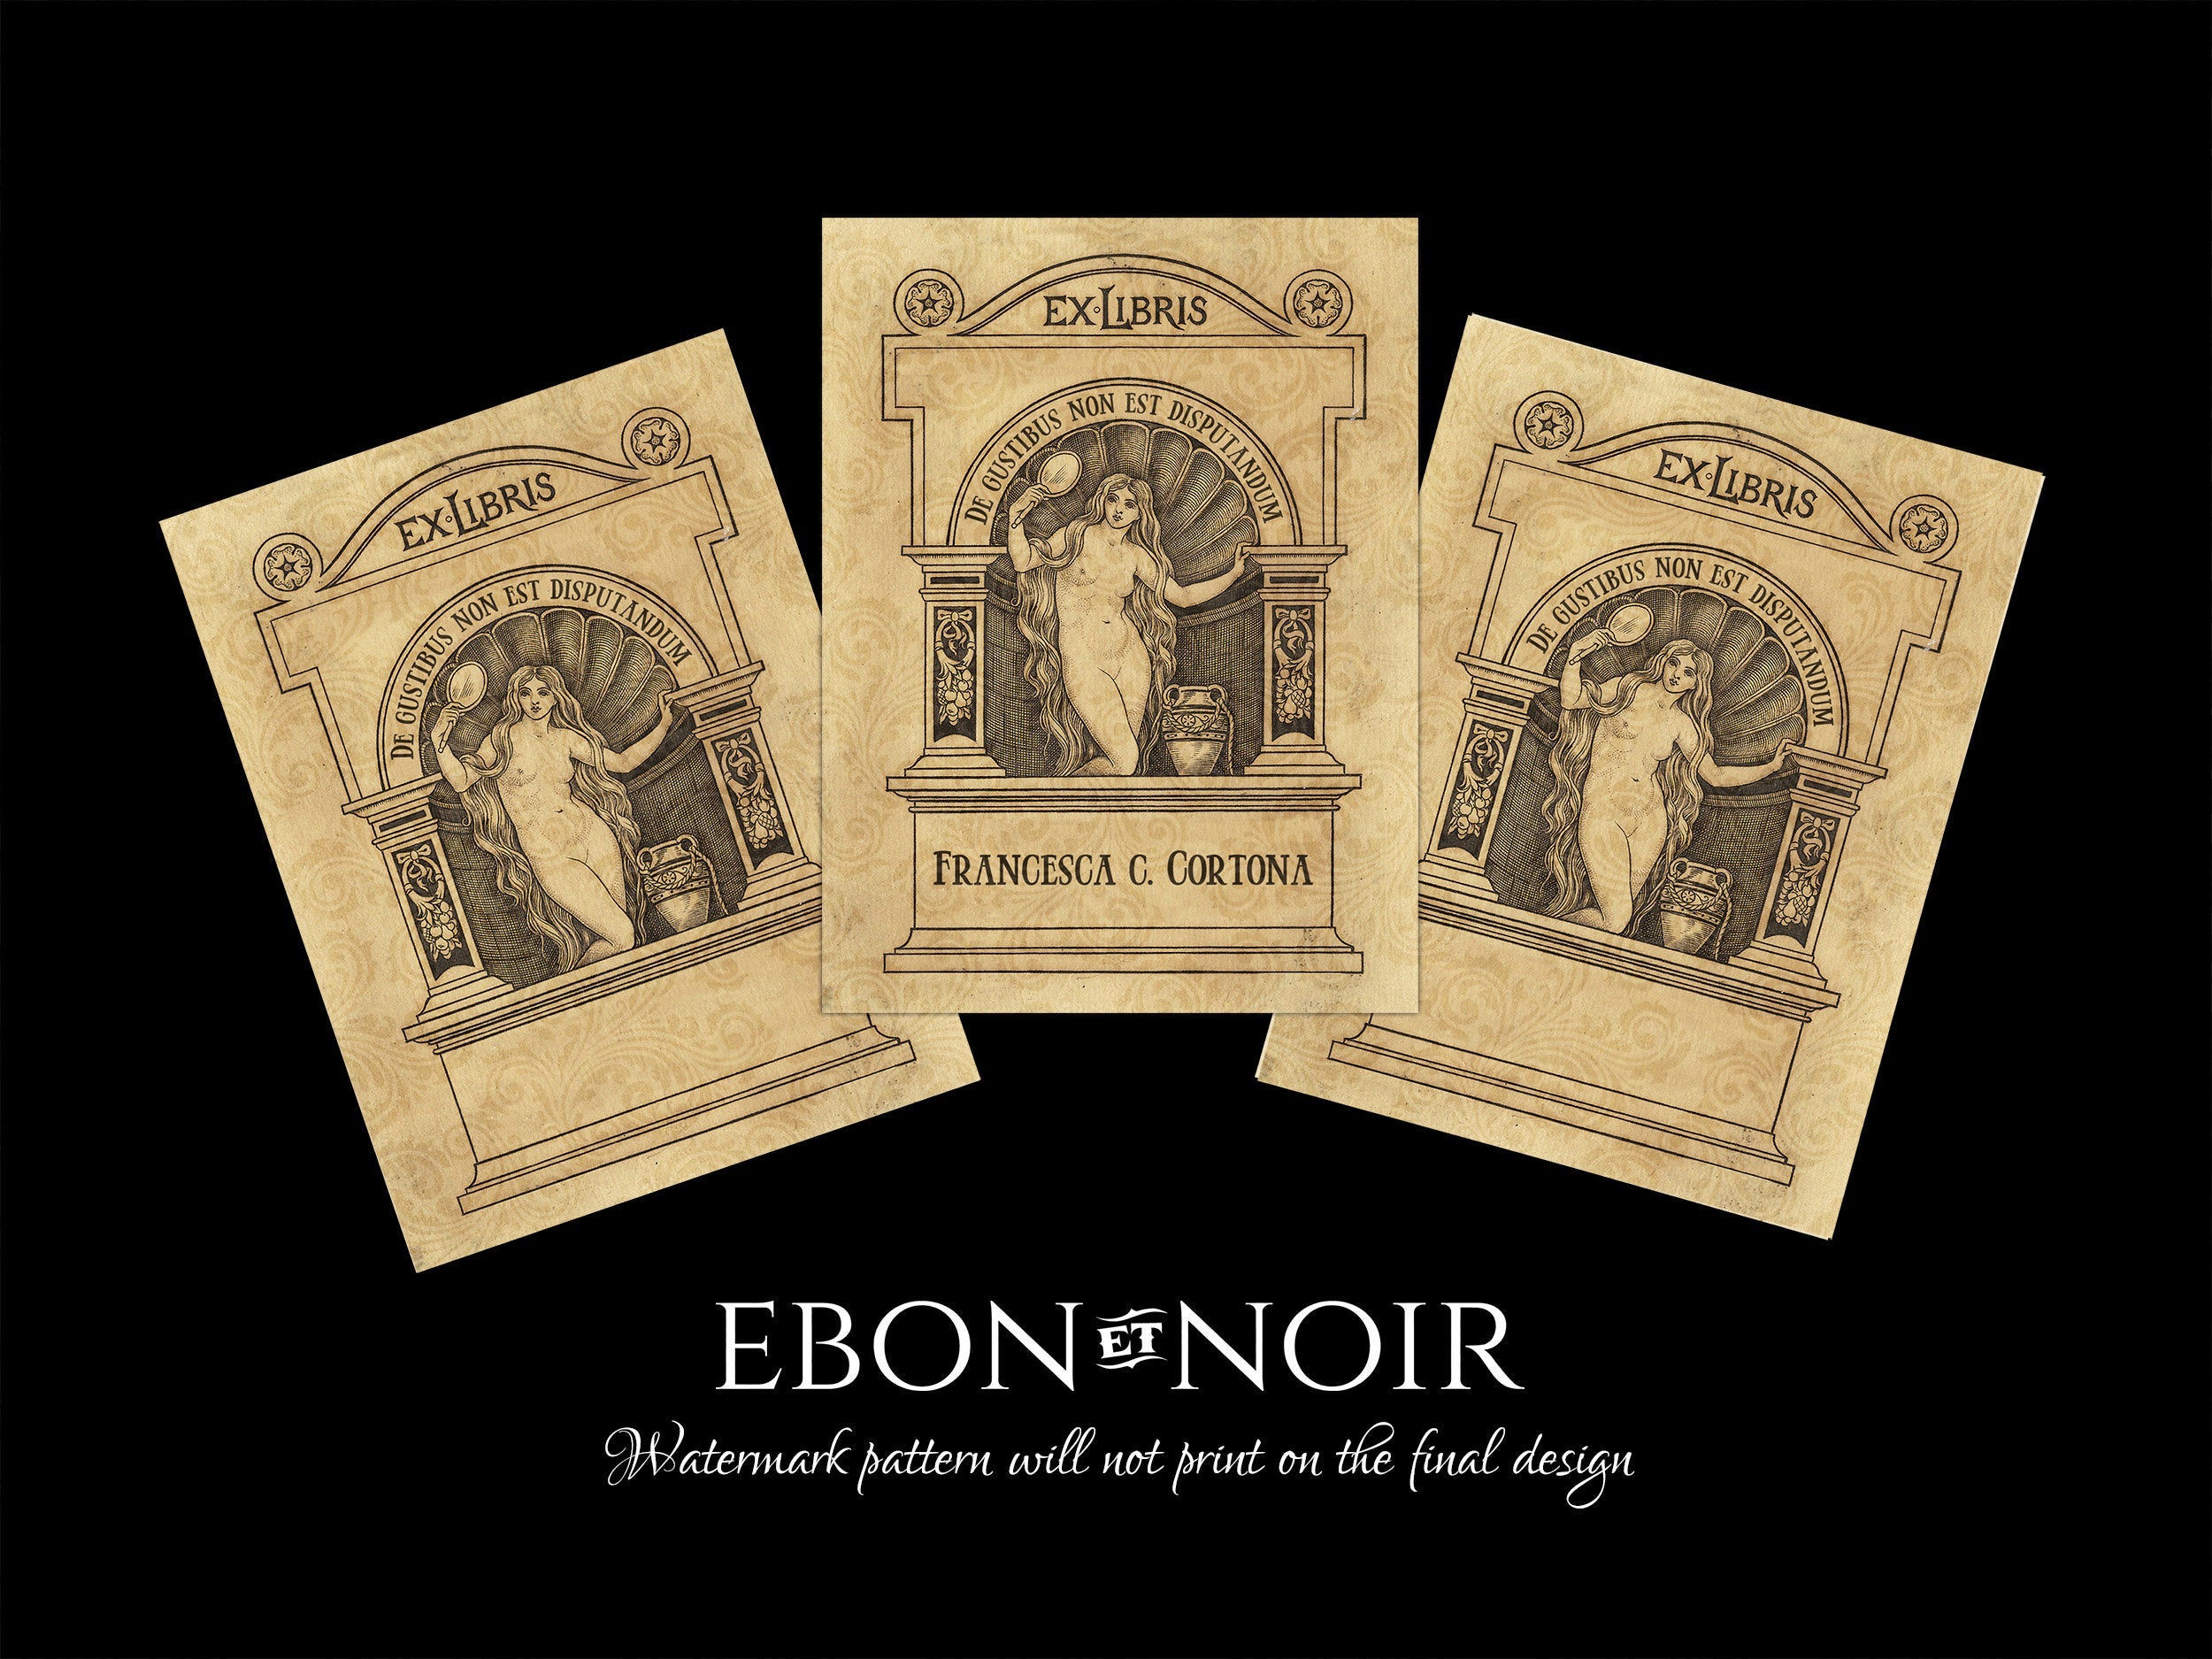 Nude Venus, Personalized Erotic Ex-Libris Bookplates, Crafted on Traditional Gummed Paper, 3in x 4in, Set of 30